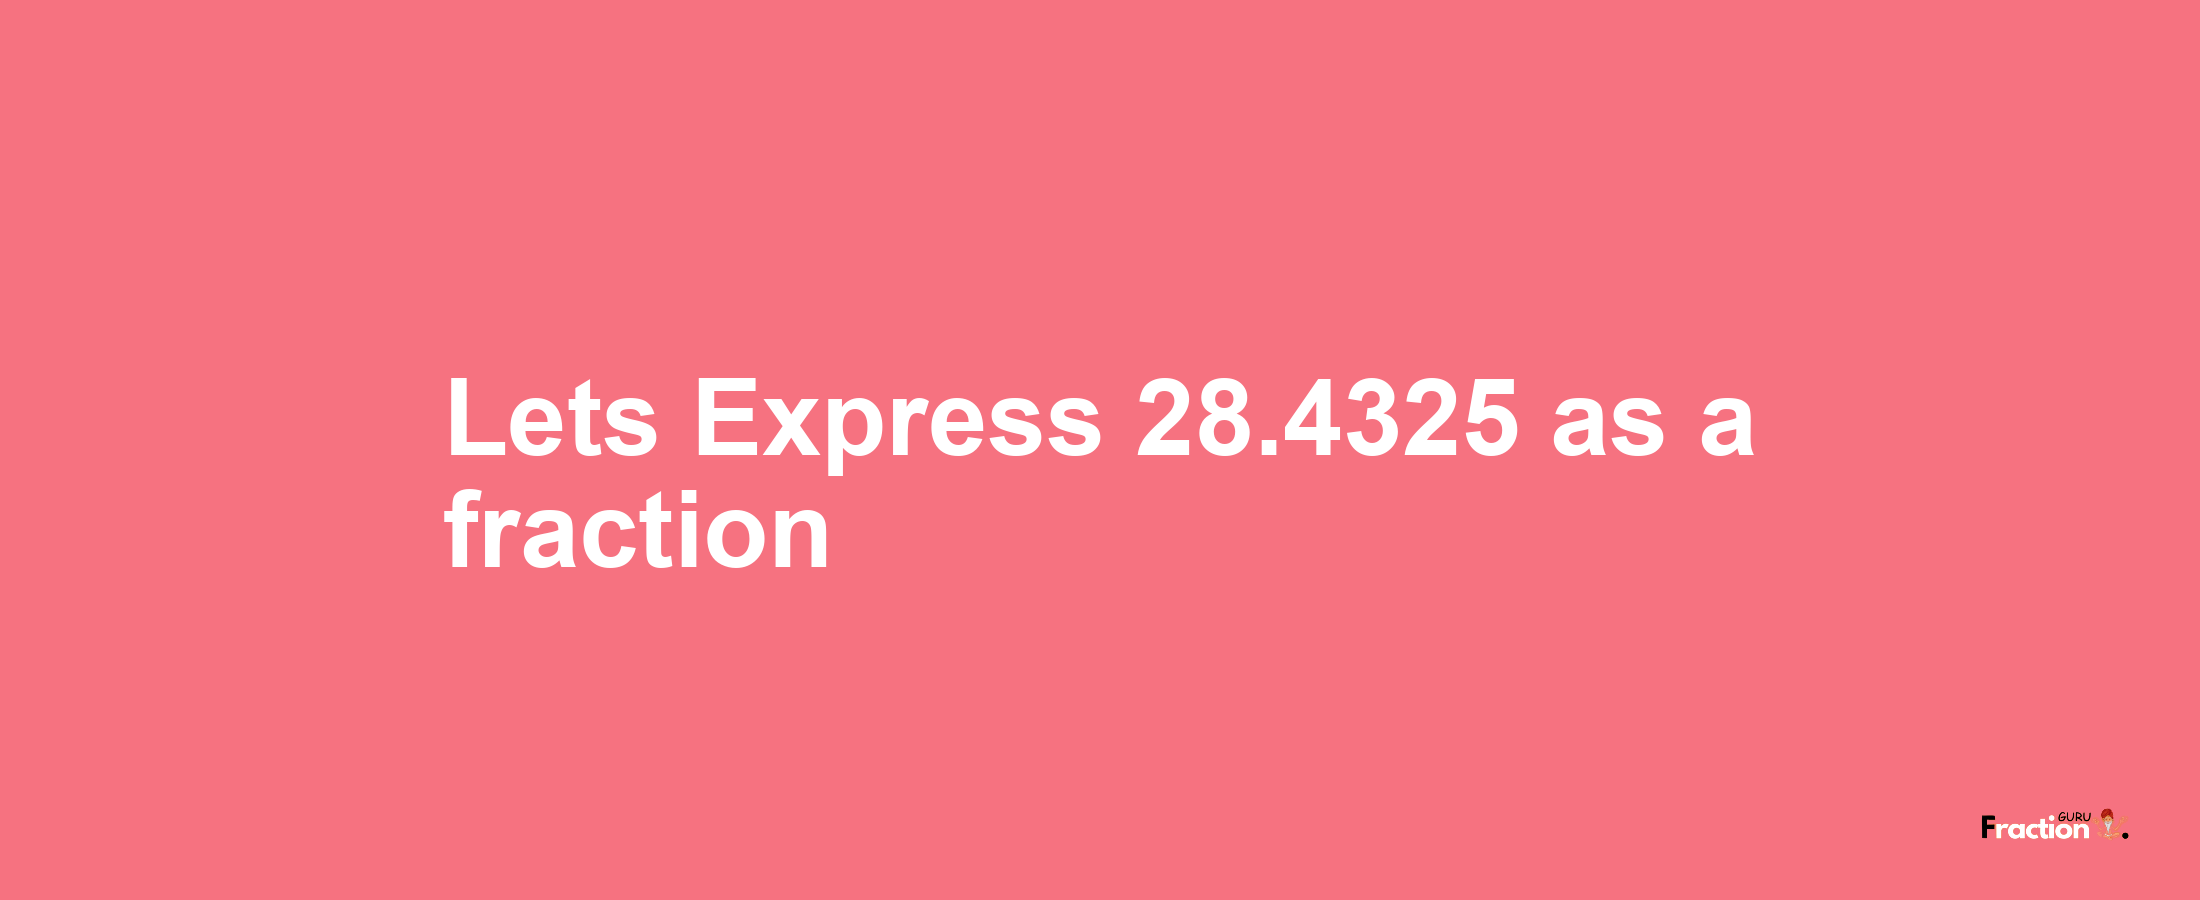 Lets Express 28.4325 as afraction